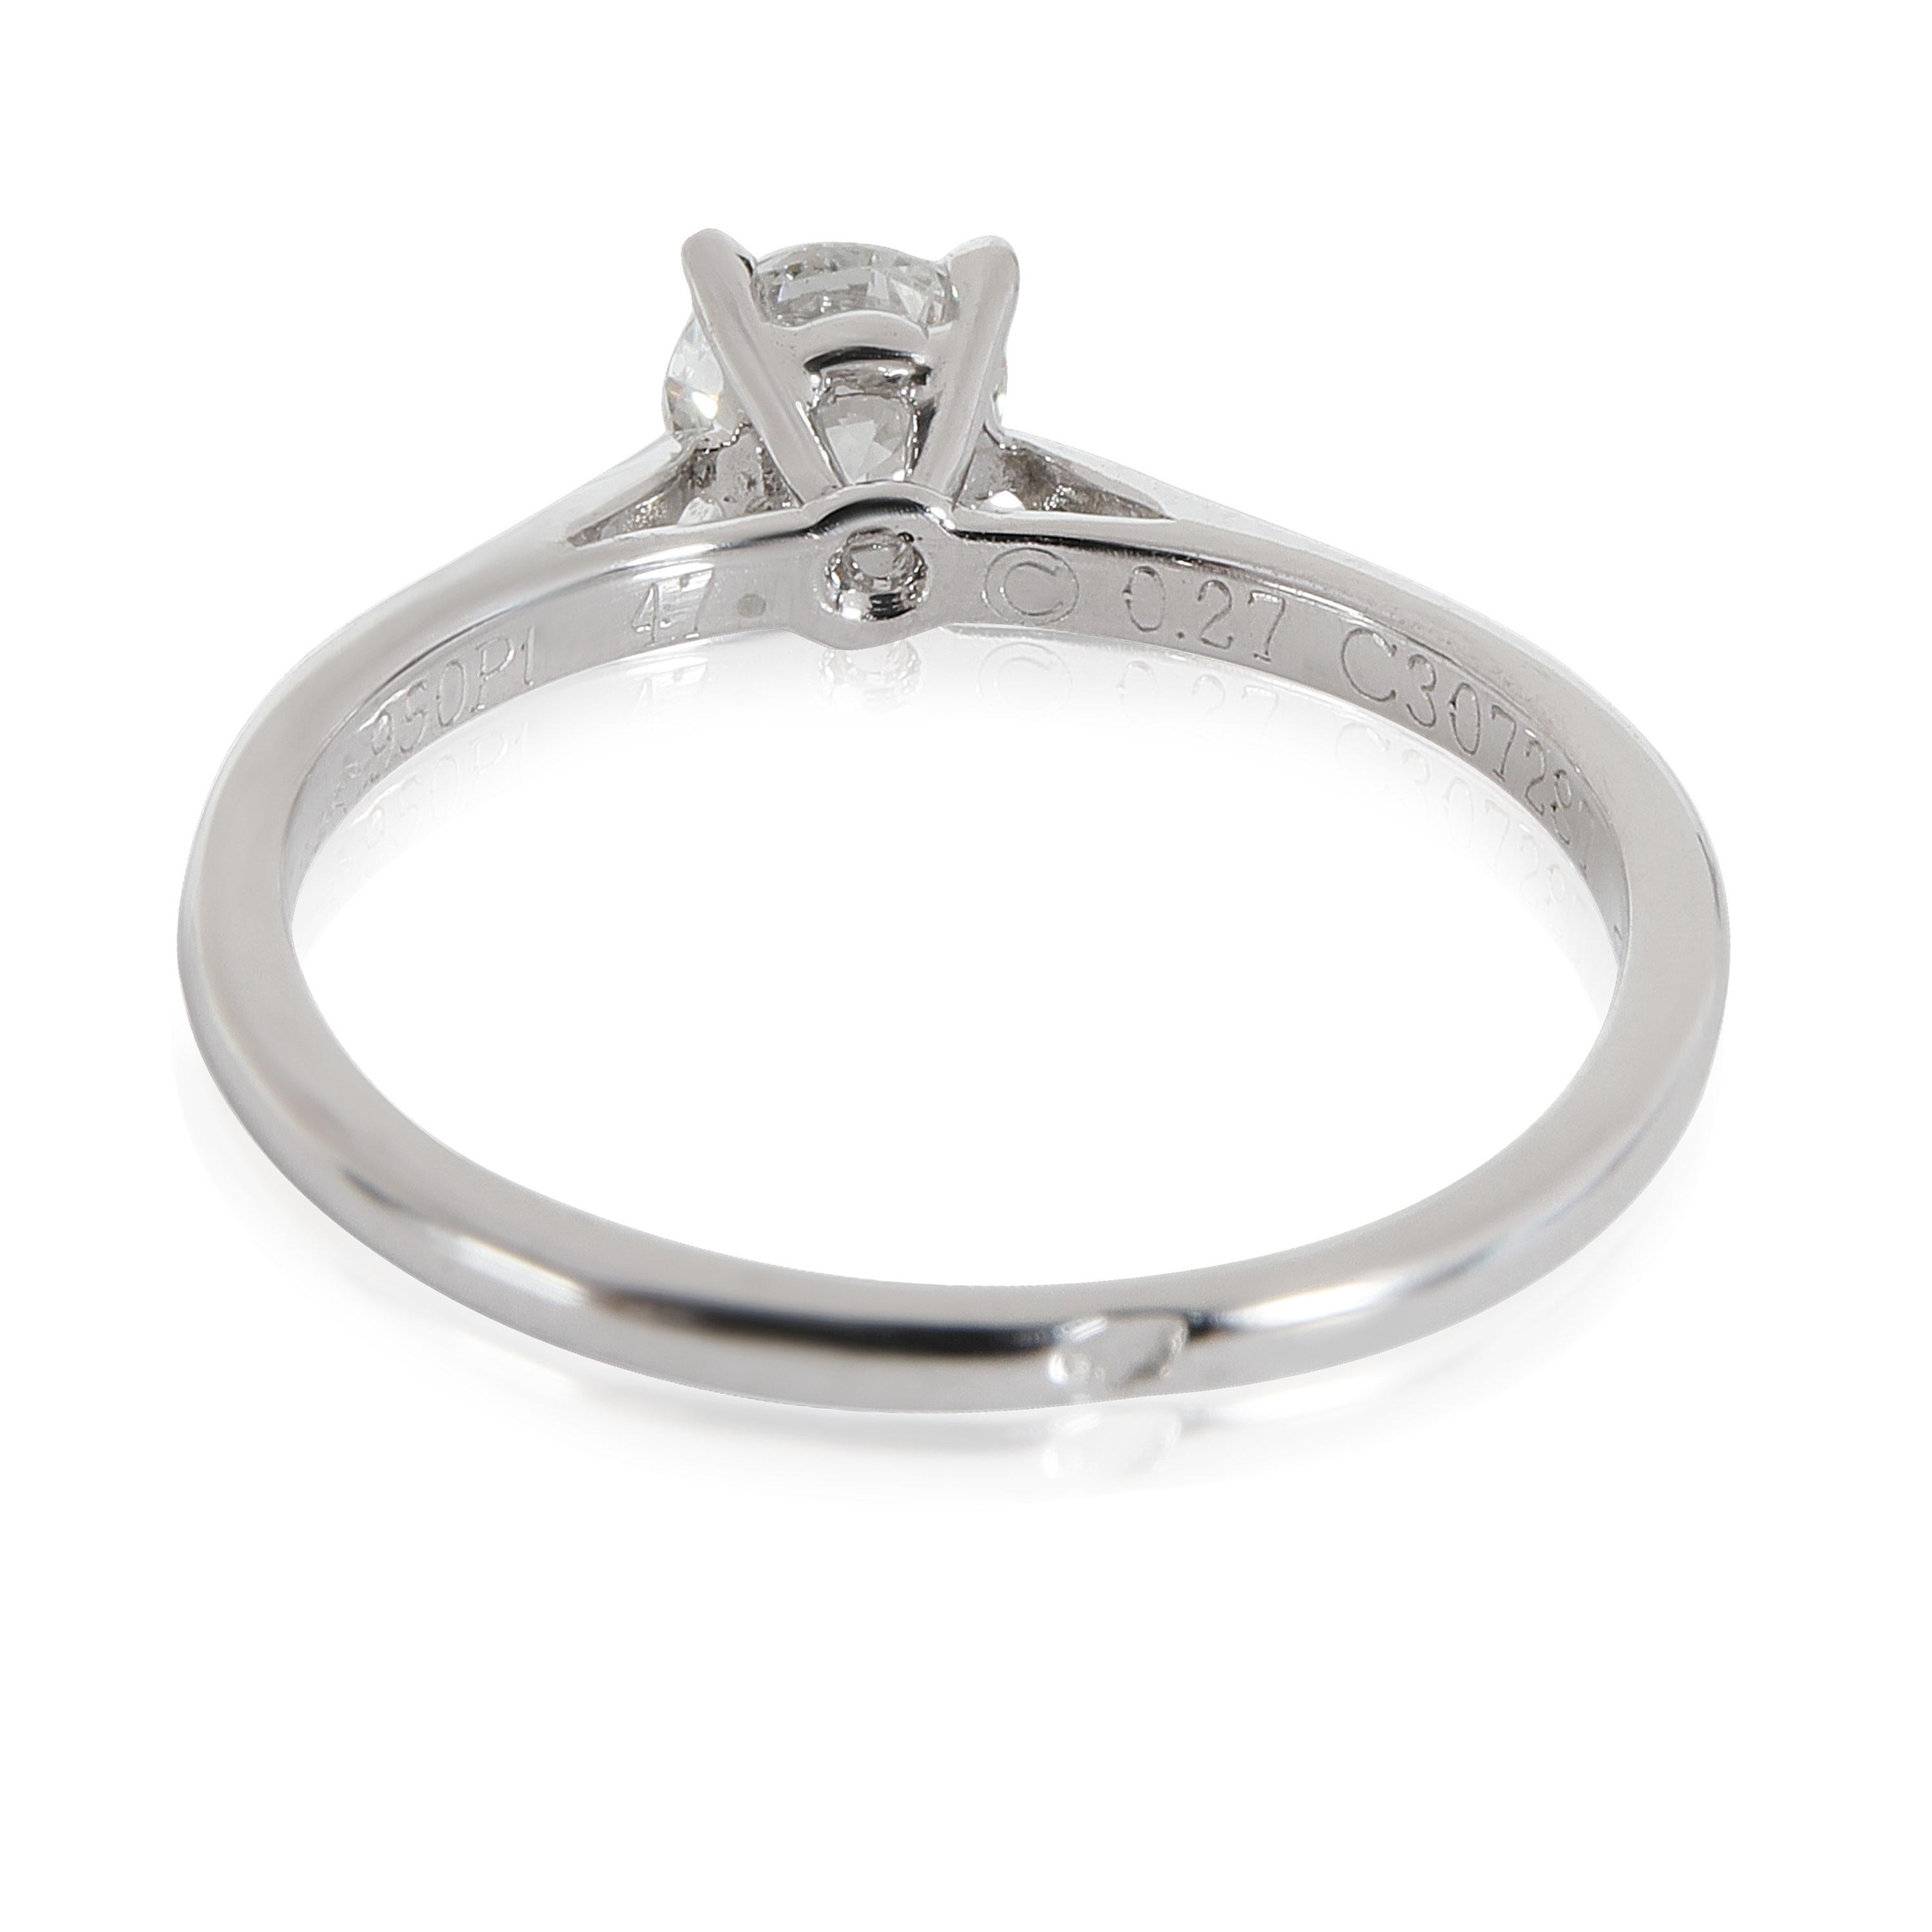 Cartier 1895 Diamond Engagement Ring in Platinum F VVS2 0.27 CTW

PRIMARY DETAILS
SKU: 112400
Listing Title: Cartier 1895 Diamond Engagement Ring in Platinum F VVS2 0.27 CTW
Condition Description: Retails for USD 3,800. In excellent condition and